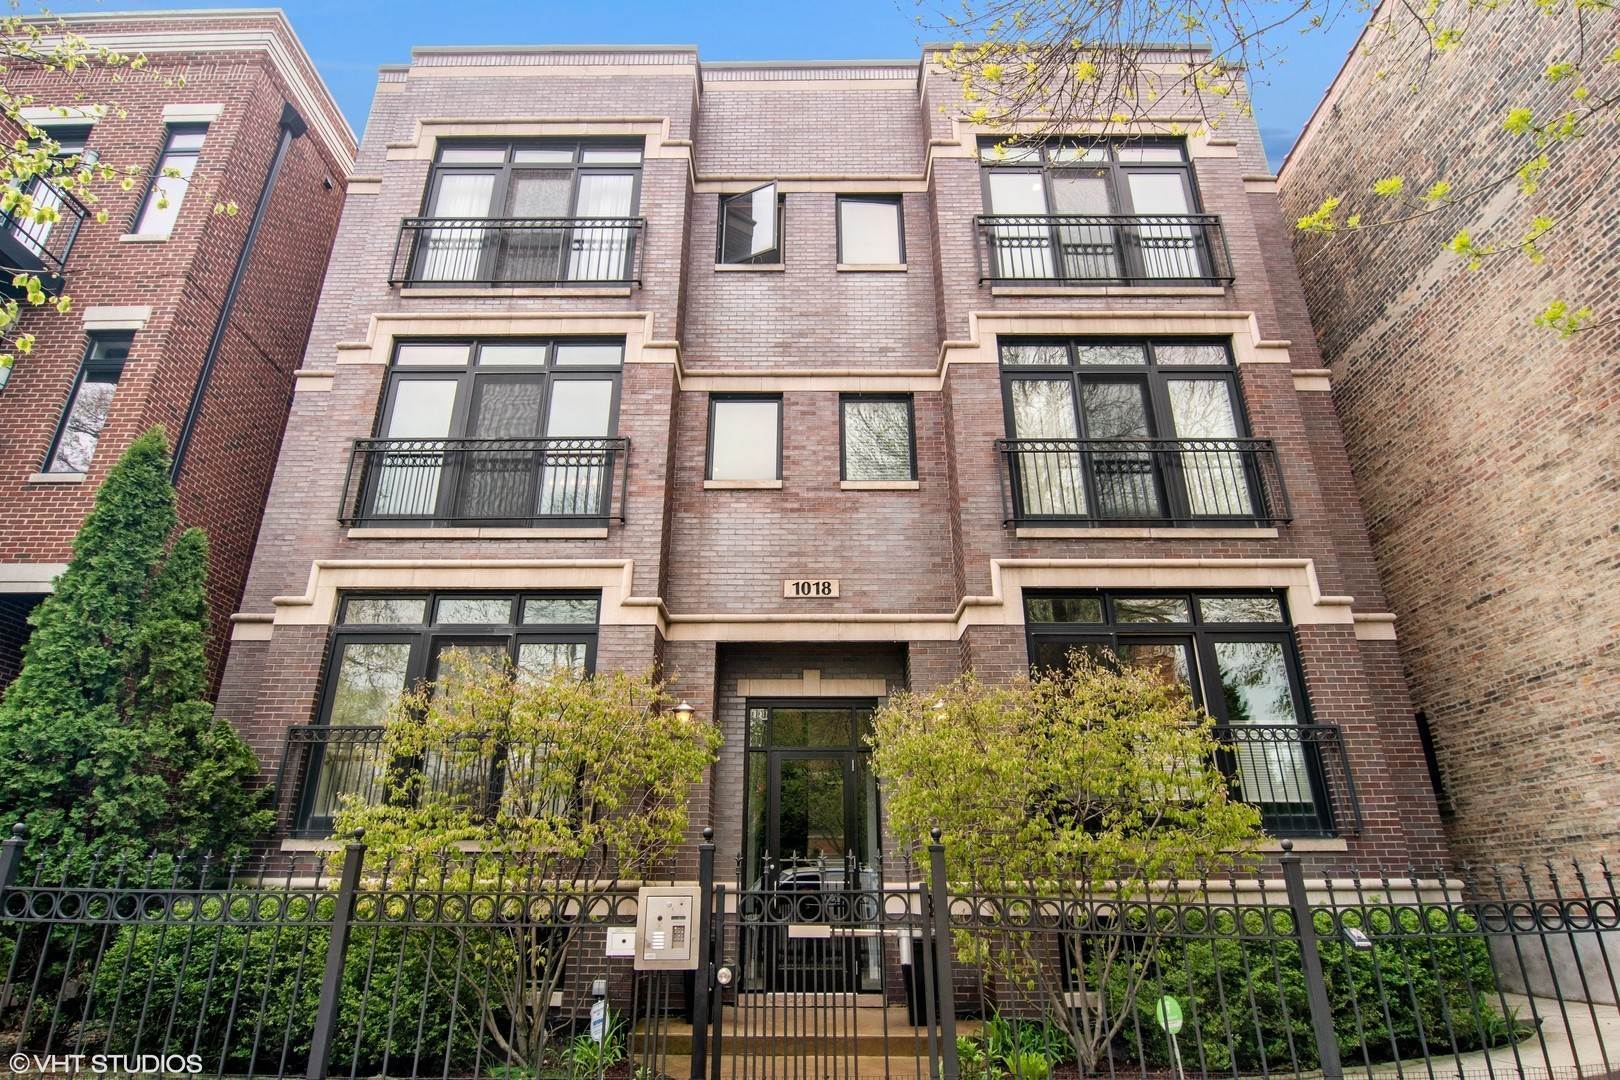 Duplex Homes for Sale at Little Italy, Chicago, IL 60607